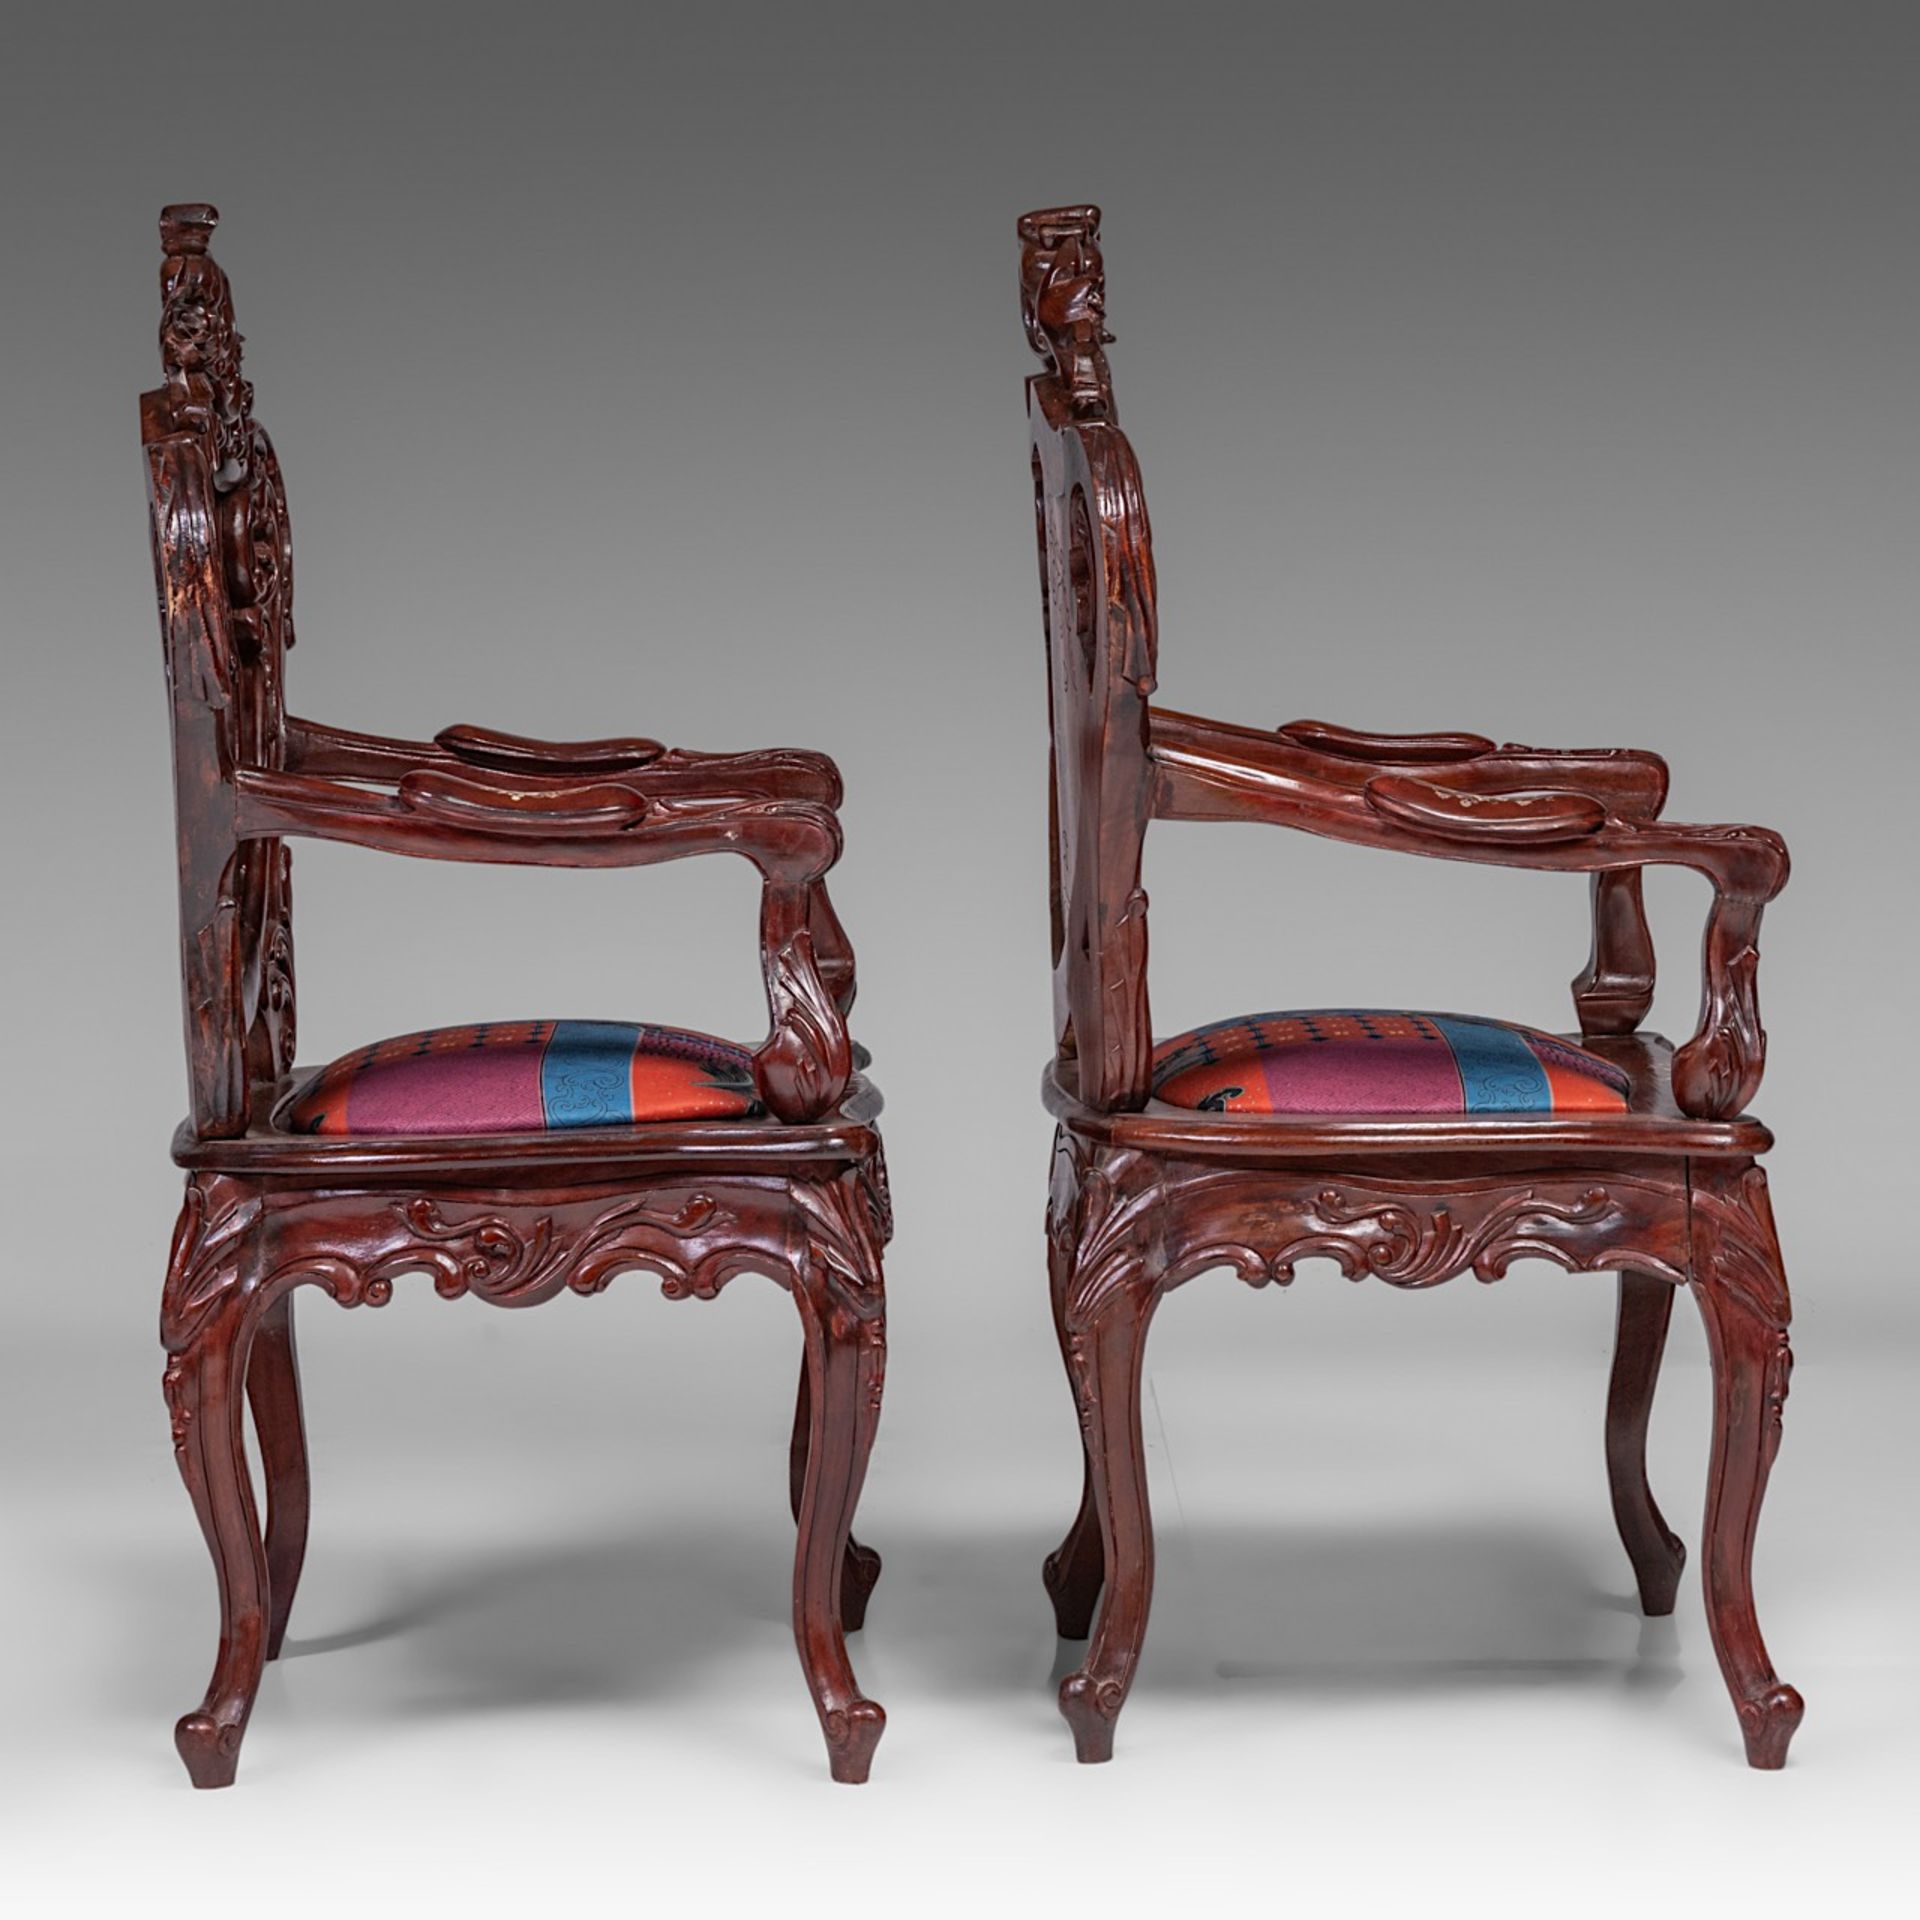 An Anglo-Chinese settee and two chairs, H settee 132 - H chair 108 cm - Image 22 of 24